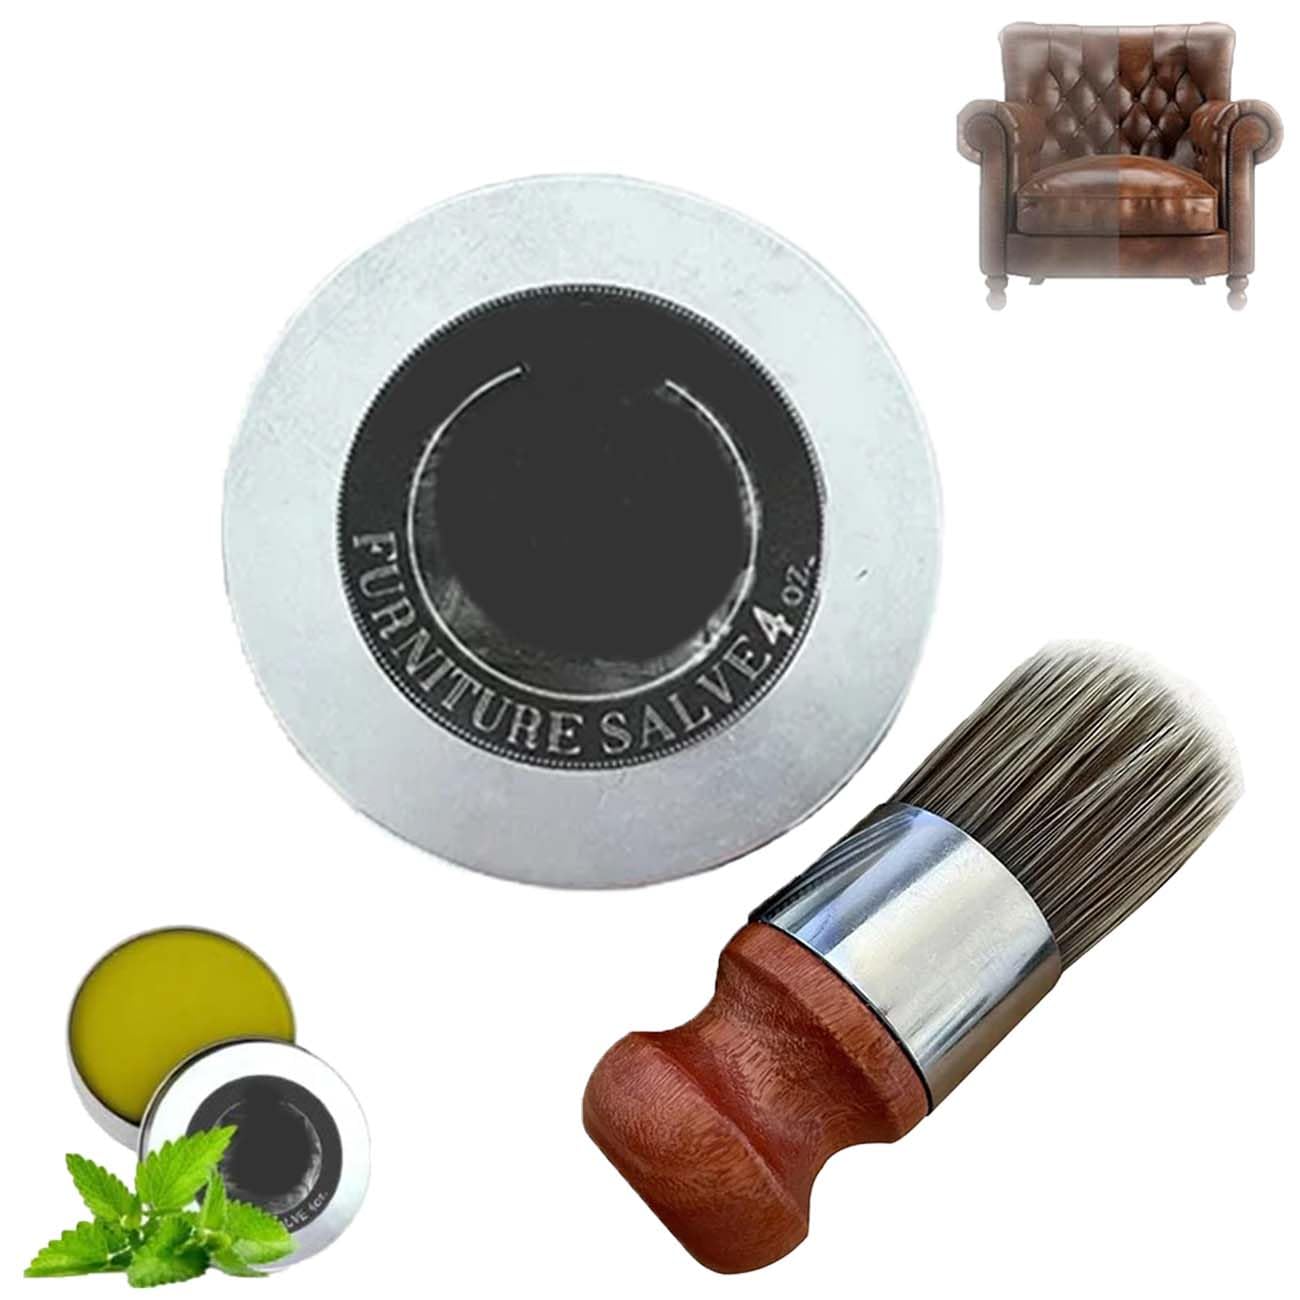 Wise Owl Furniture Salve for Leather,2024 New Furniture Salve/Leather Salve,Leather Furniture Salve and Brush Bundle,Leather Salve for Furniture,Suitable for Leather,Furniture,Wood Floor Protectio von ENILSA